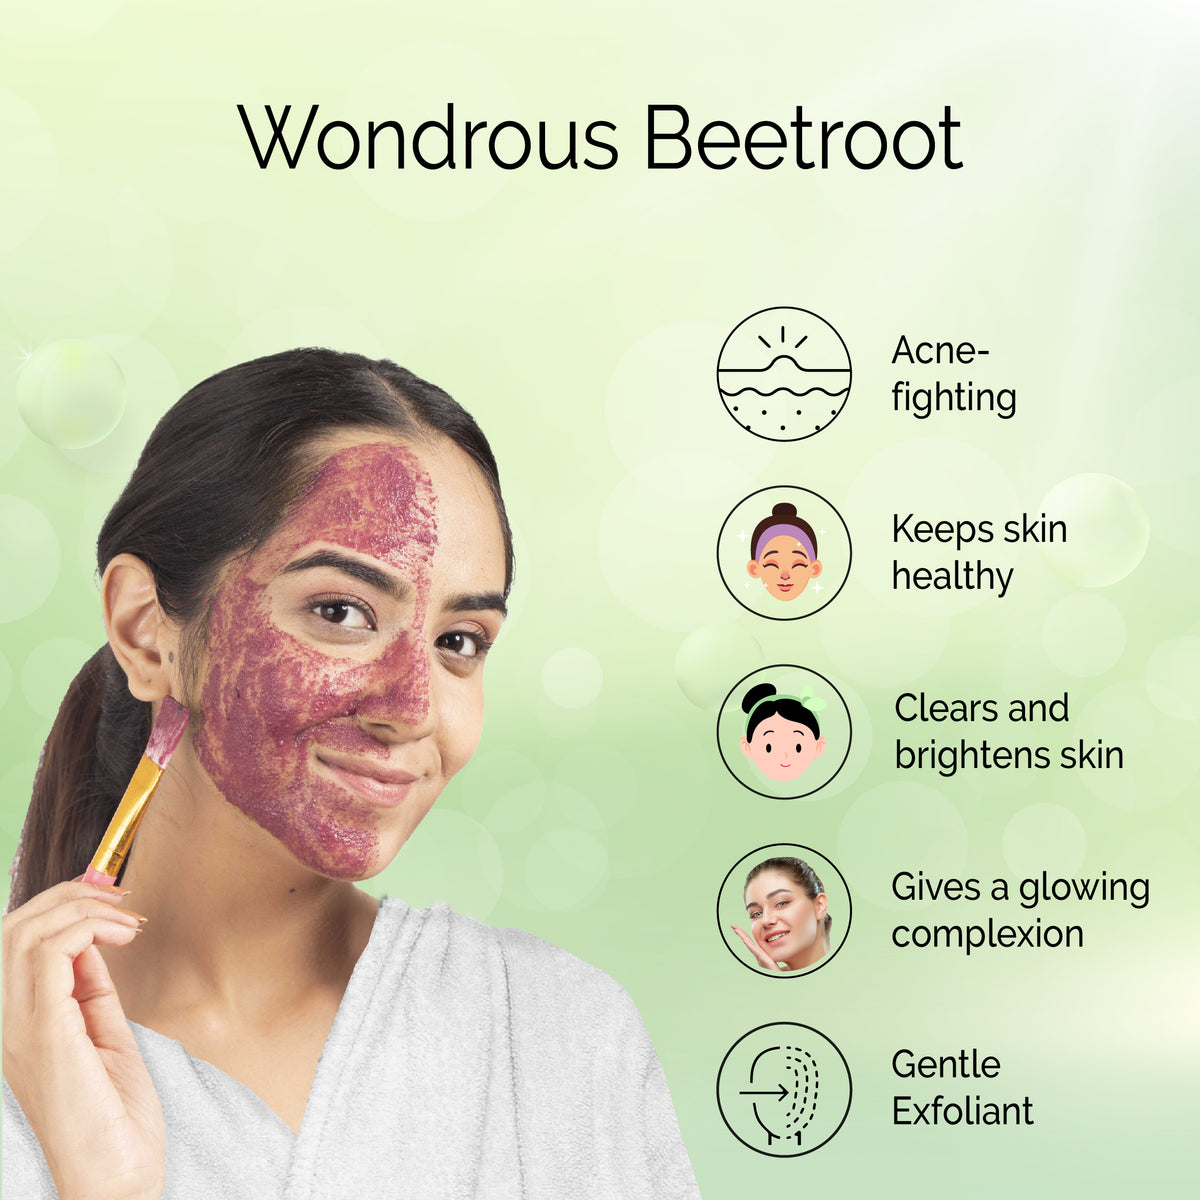 Beetroot powder <h4> 100% Natural | Hygienically Dried | Face Pack for Clear Healthy Rosy Skin <h4><h6>Made from hygienically dried fresh beetroot that preserves their skin caring activies without adding chemicals or preservatives.<h6>